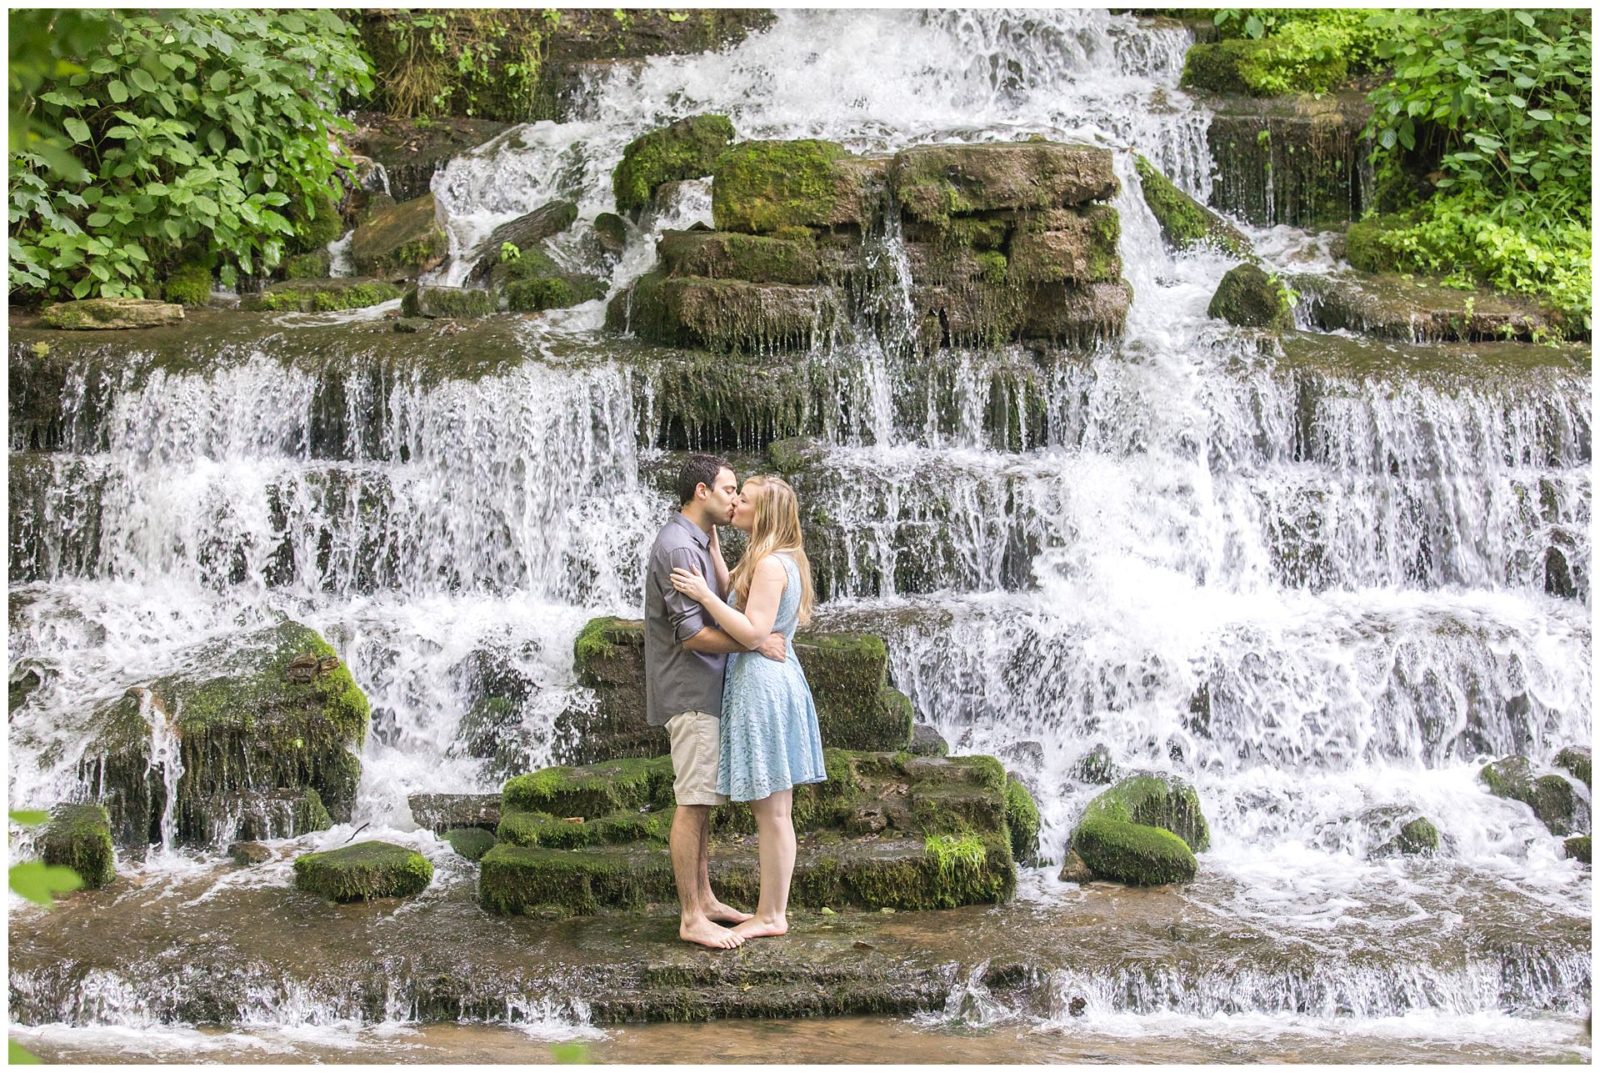 Engagement session at a waterfall at Shaker Village in Harrodsburg, KY